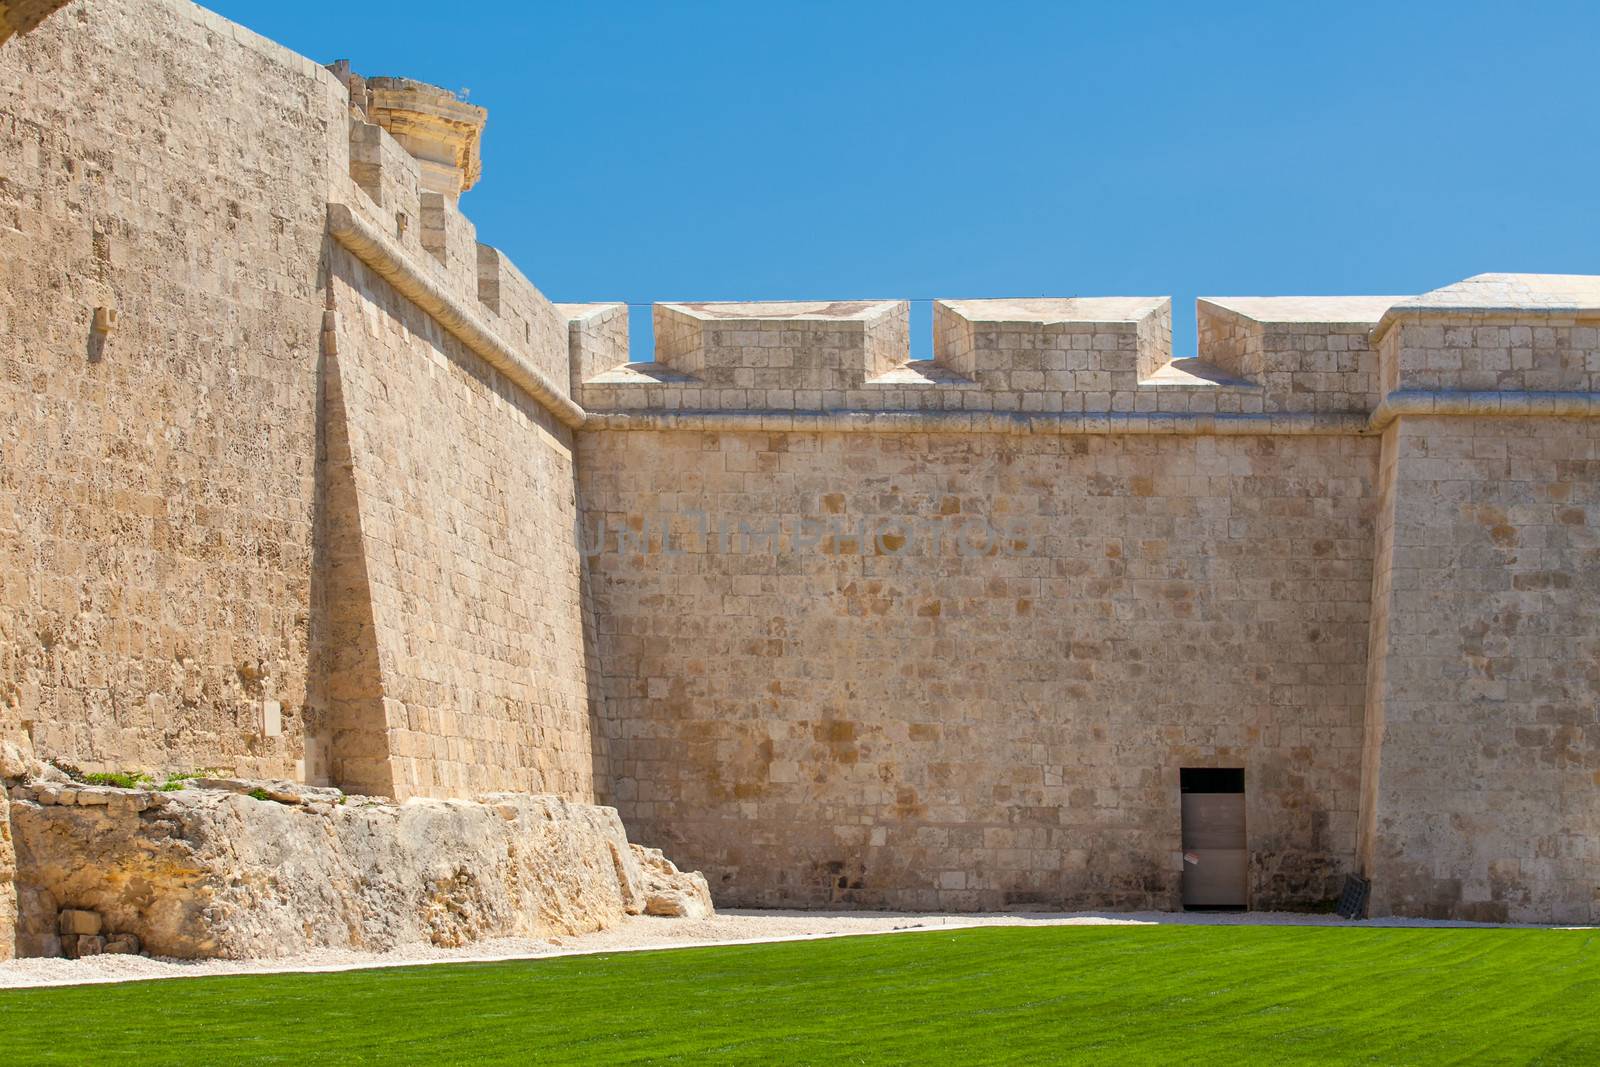 The newly restored bastion walls surrounding the medieval city of Mdina in Malta